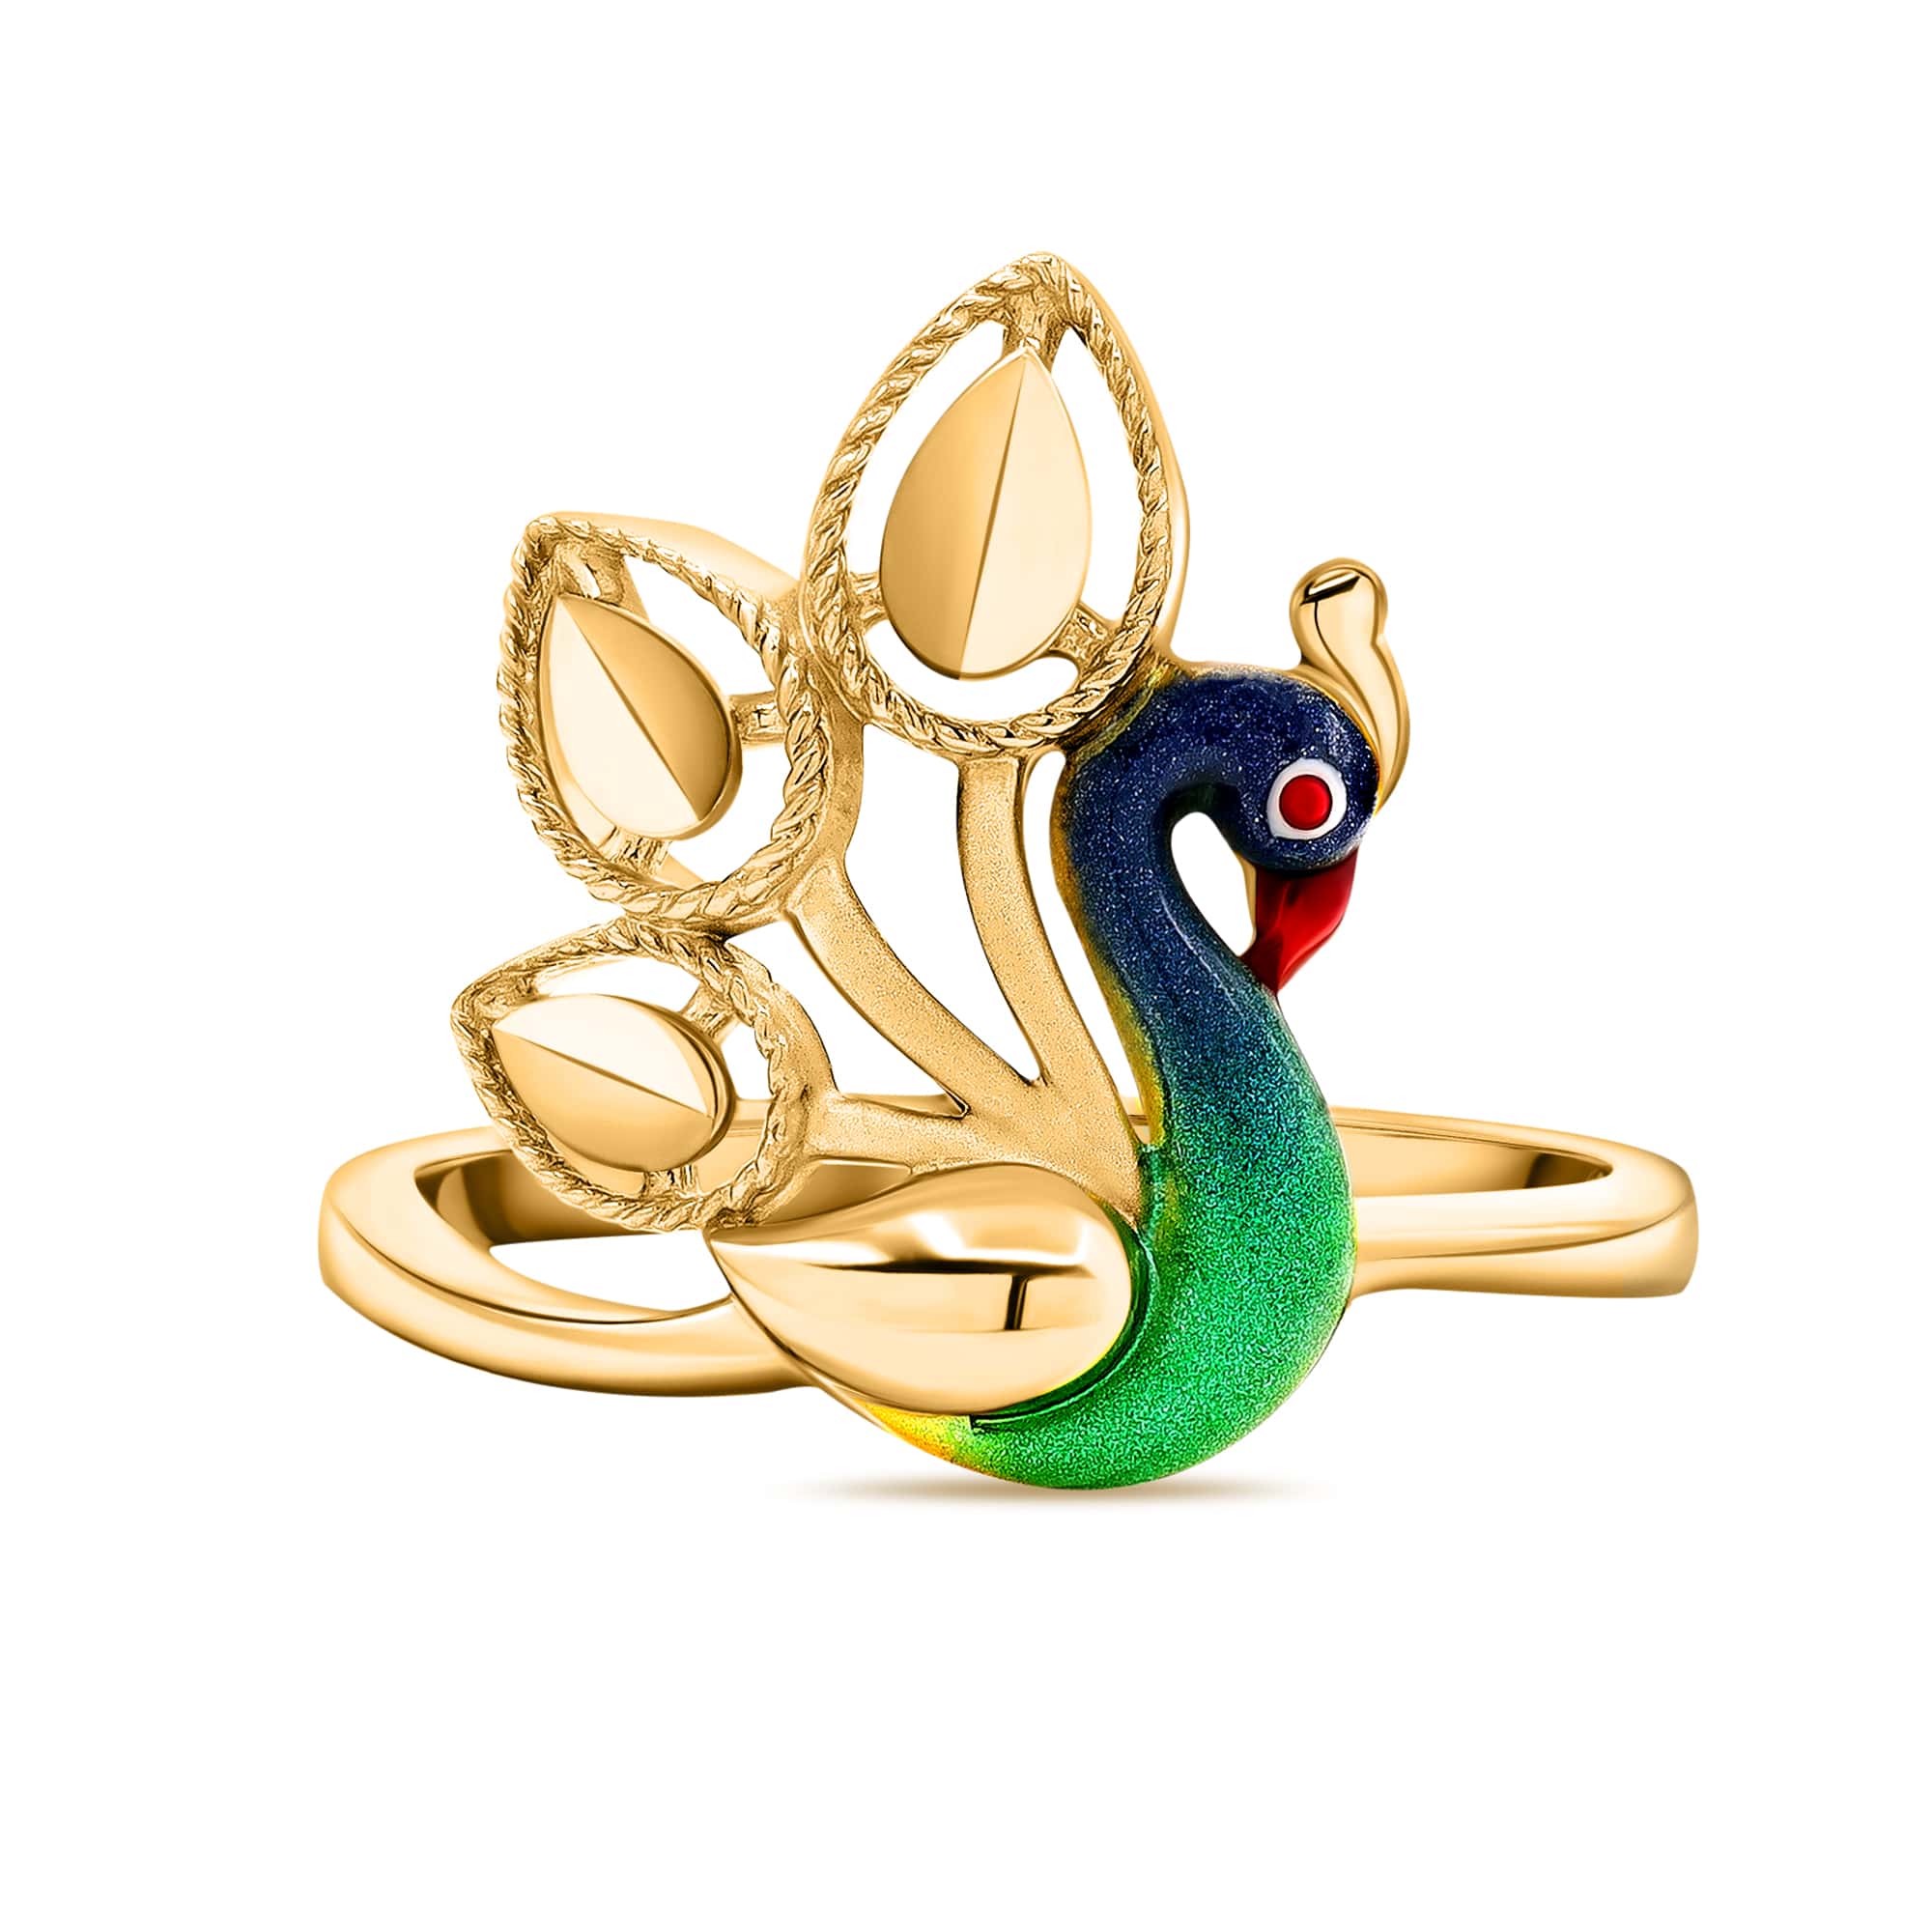 Gold Peacock Ring - Buy Gold Peacock Ring online in India